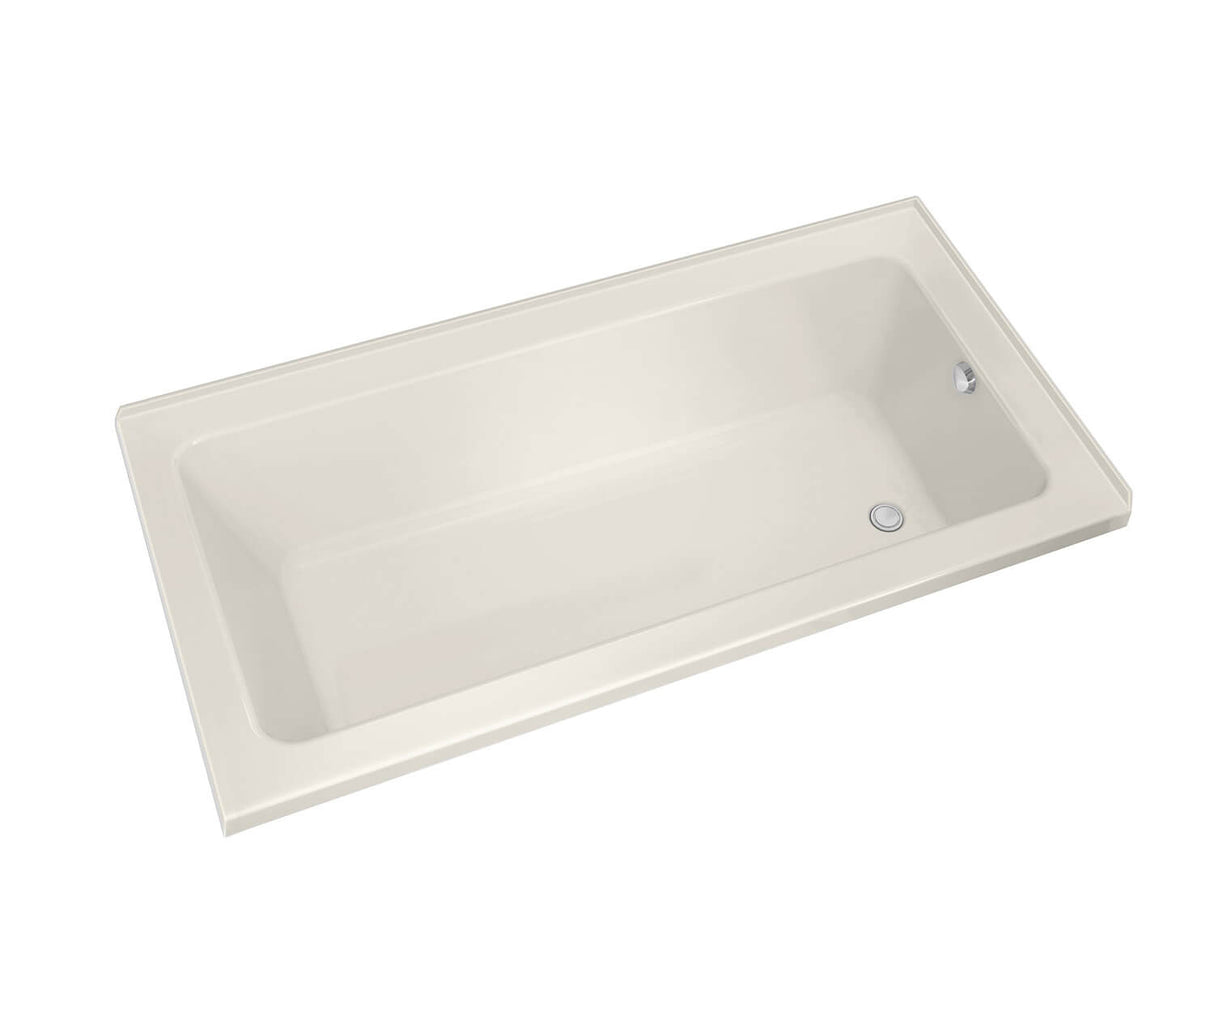 MAAX 106212-L-097-007 Pose 7236 IF Acrylic Corner Right Left-Hand Drain Combined Whirlpool & Aeroeffect Bathtub in Biscuit